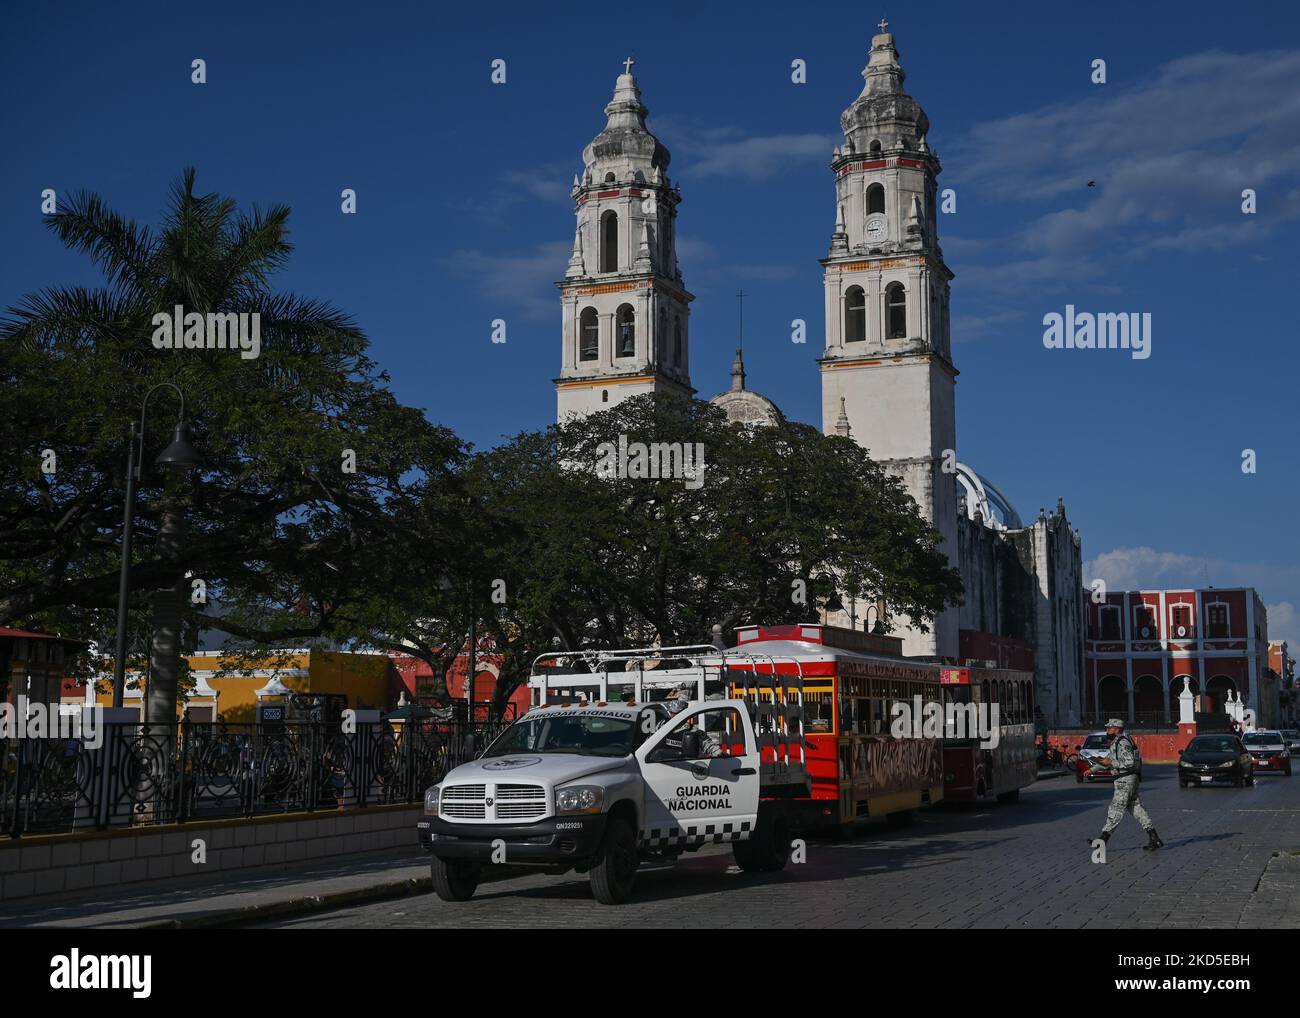 View of the historical center of Campeche with the Our Lady of the Immaculate Conception Cathedral (Parroquia de nuestra Señora de la Inmaculada Concepción Santa Iglesia Catedral). On Thursday, March 16, 2022, in San Francisco de Campeche, Campeche, Mexico. (Photo by Artur Widak/NurPhoto) Stock Photo